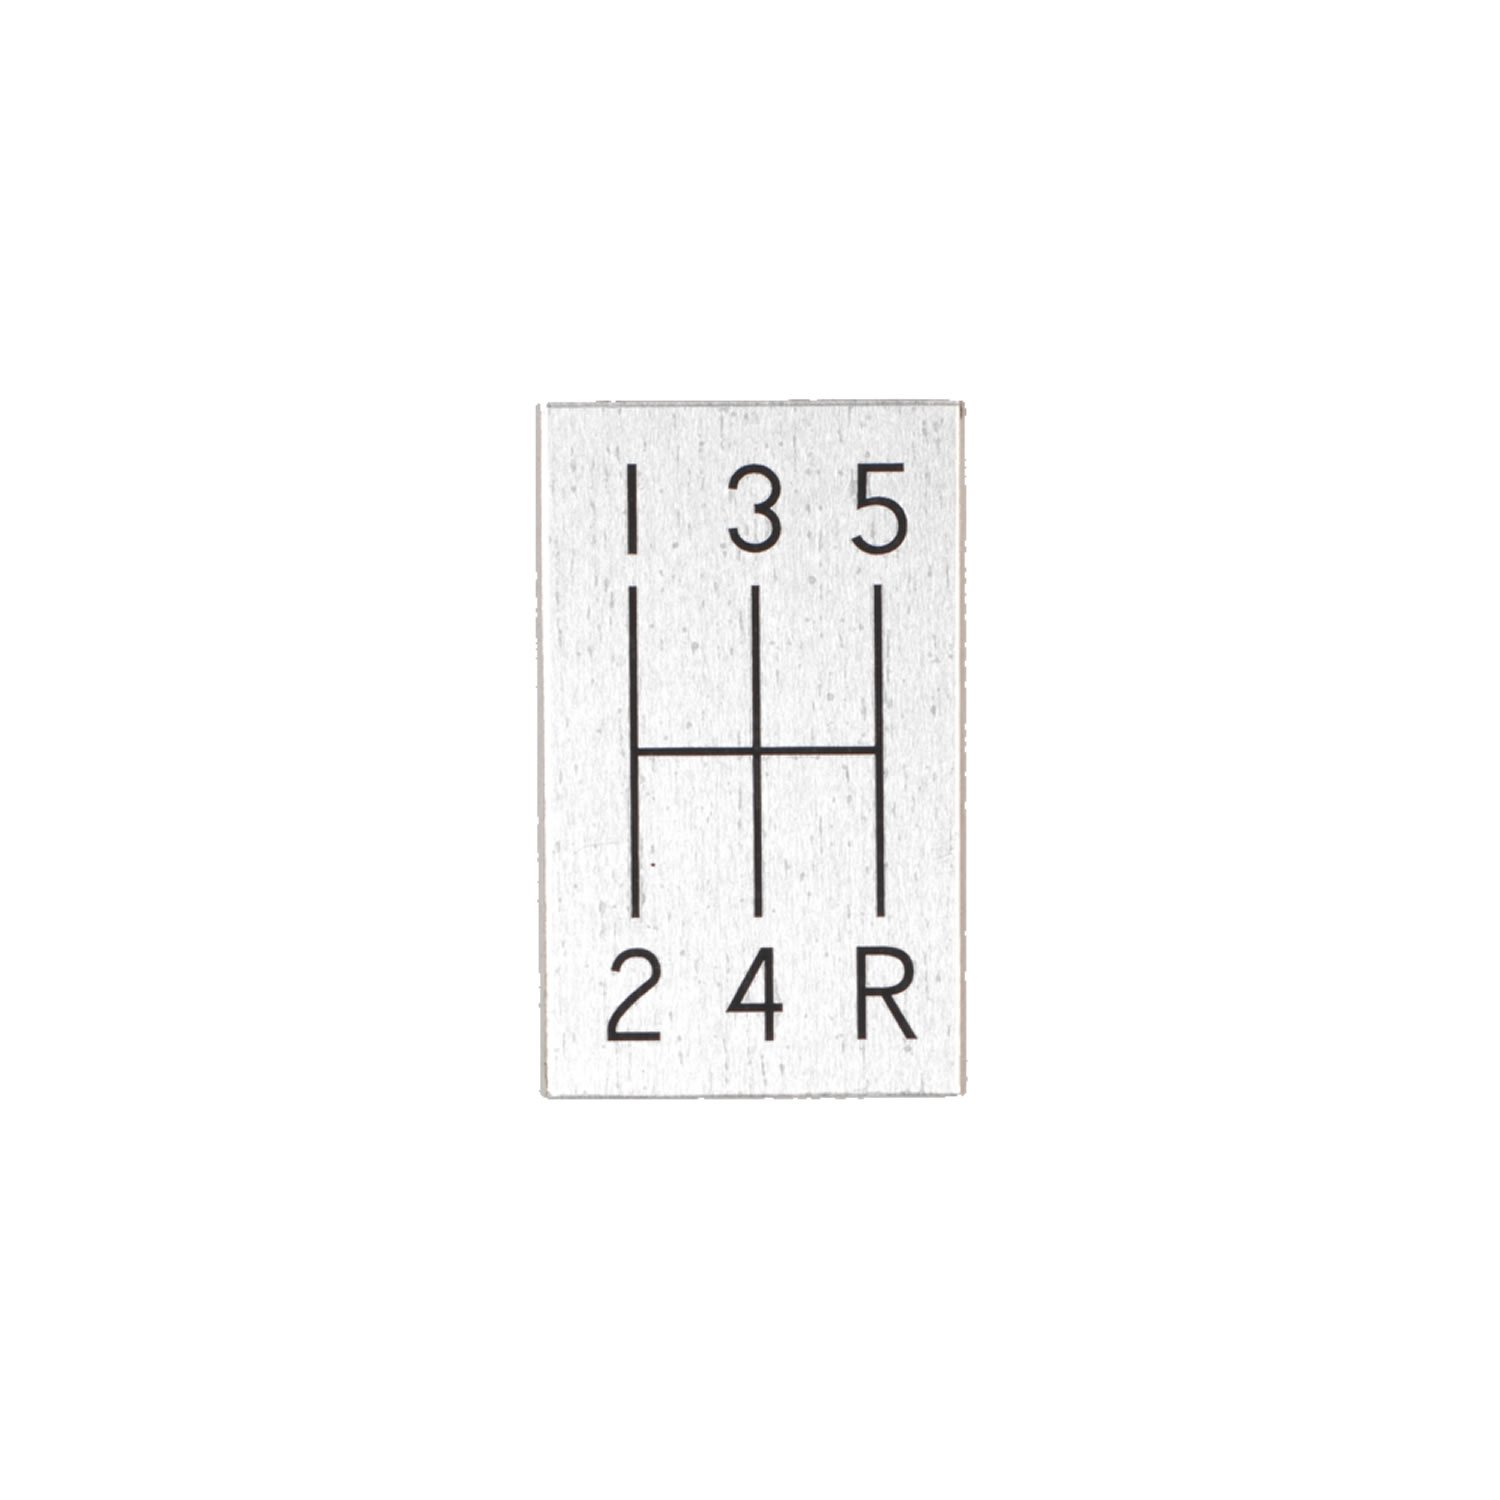 5 speed shift pattern plate for 1963 1967